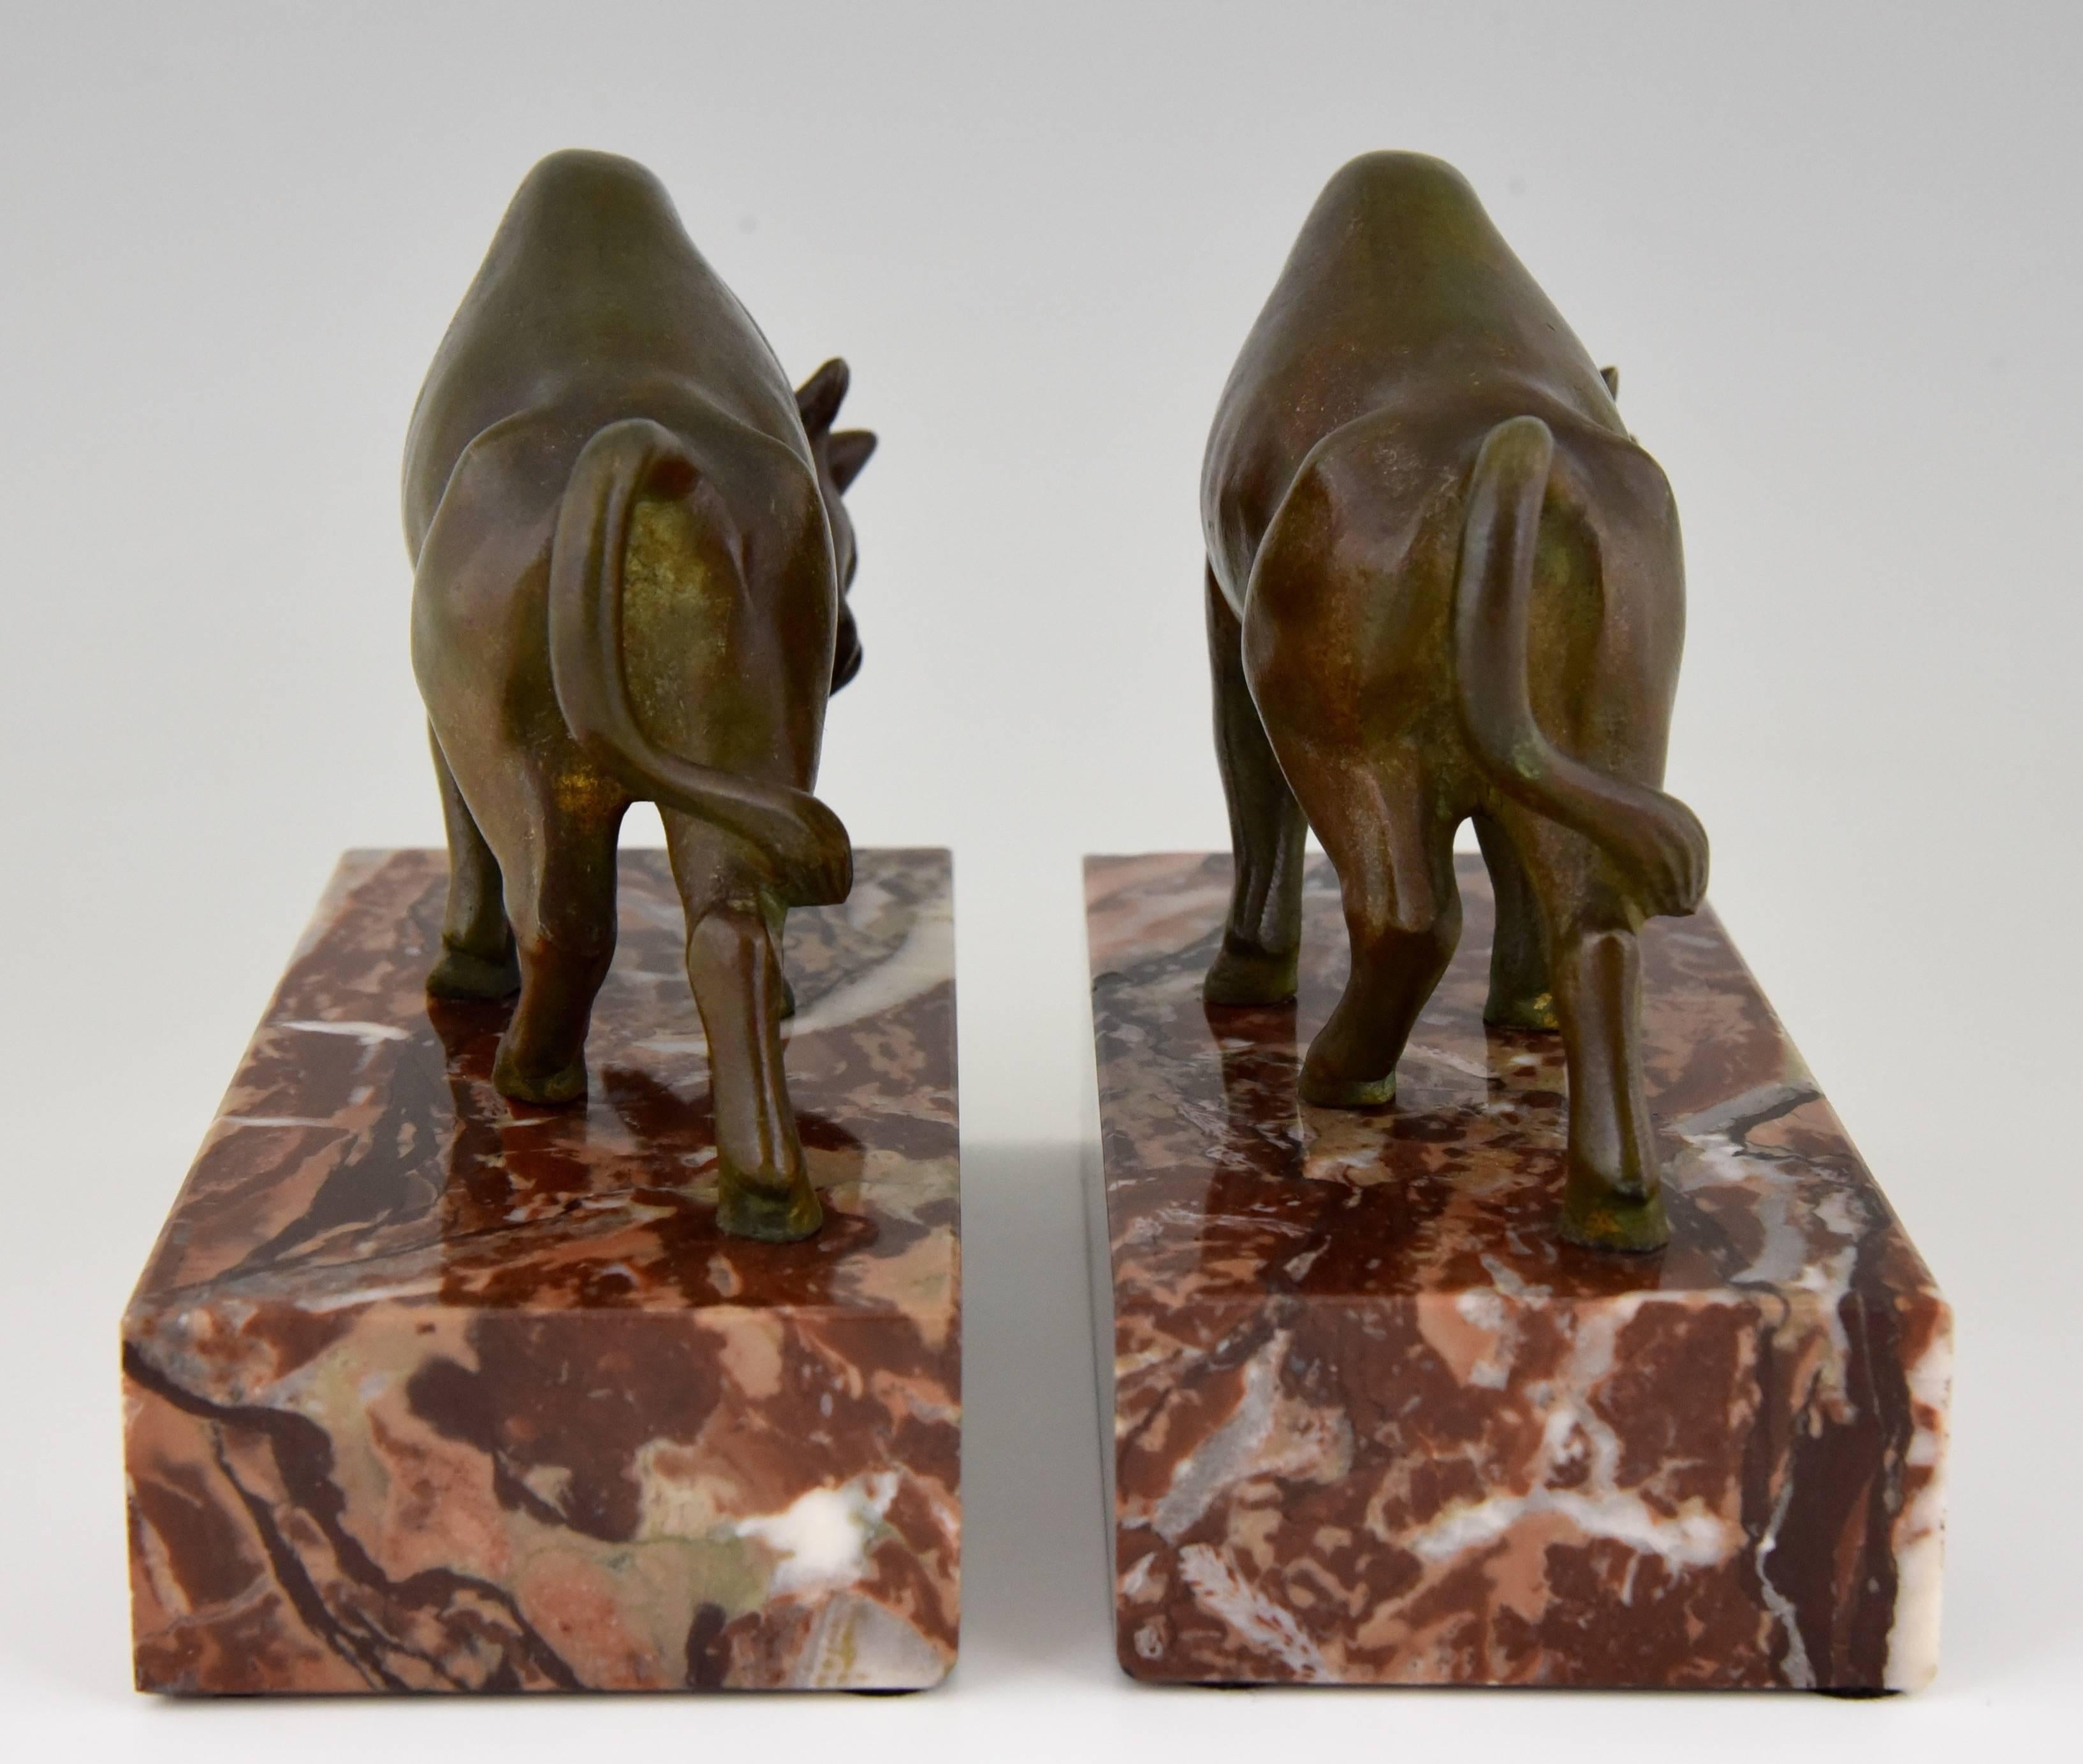 French Art Deco Bronze Bull Bookends by Luc, 1930 France